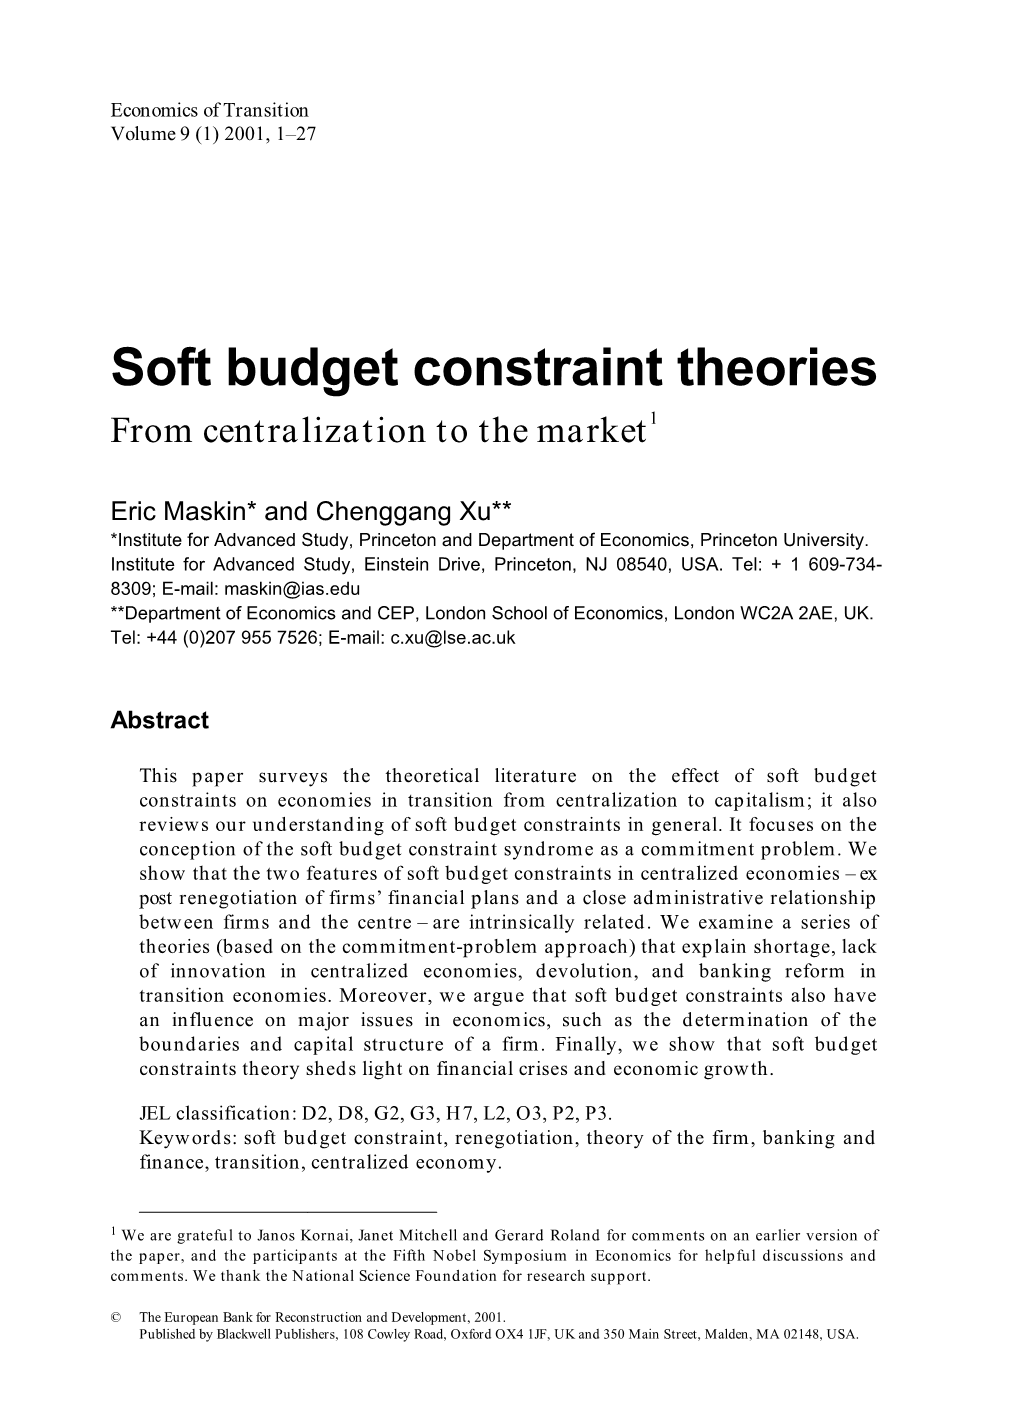 Soft Budget Constraint Theories from Centralization to the Market1